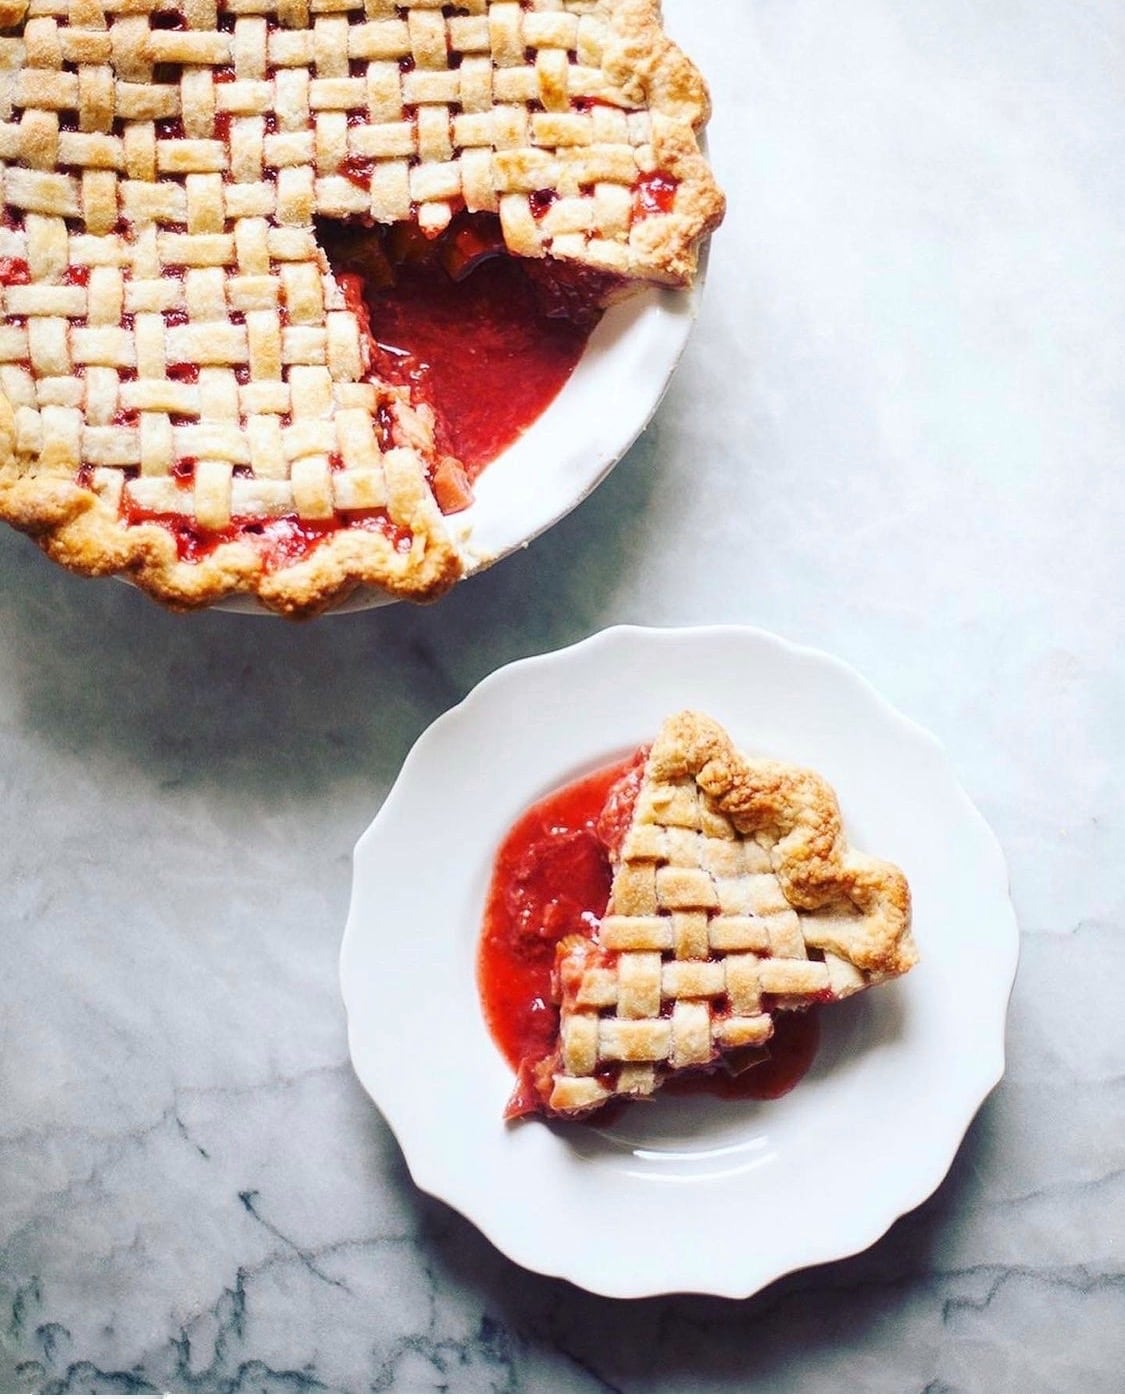 strawberry rhubarb pie with a lattice top, one piece plated.